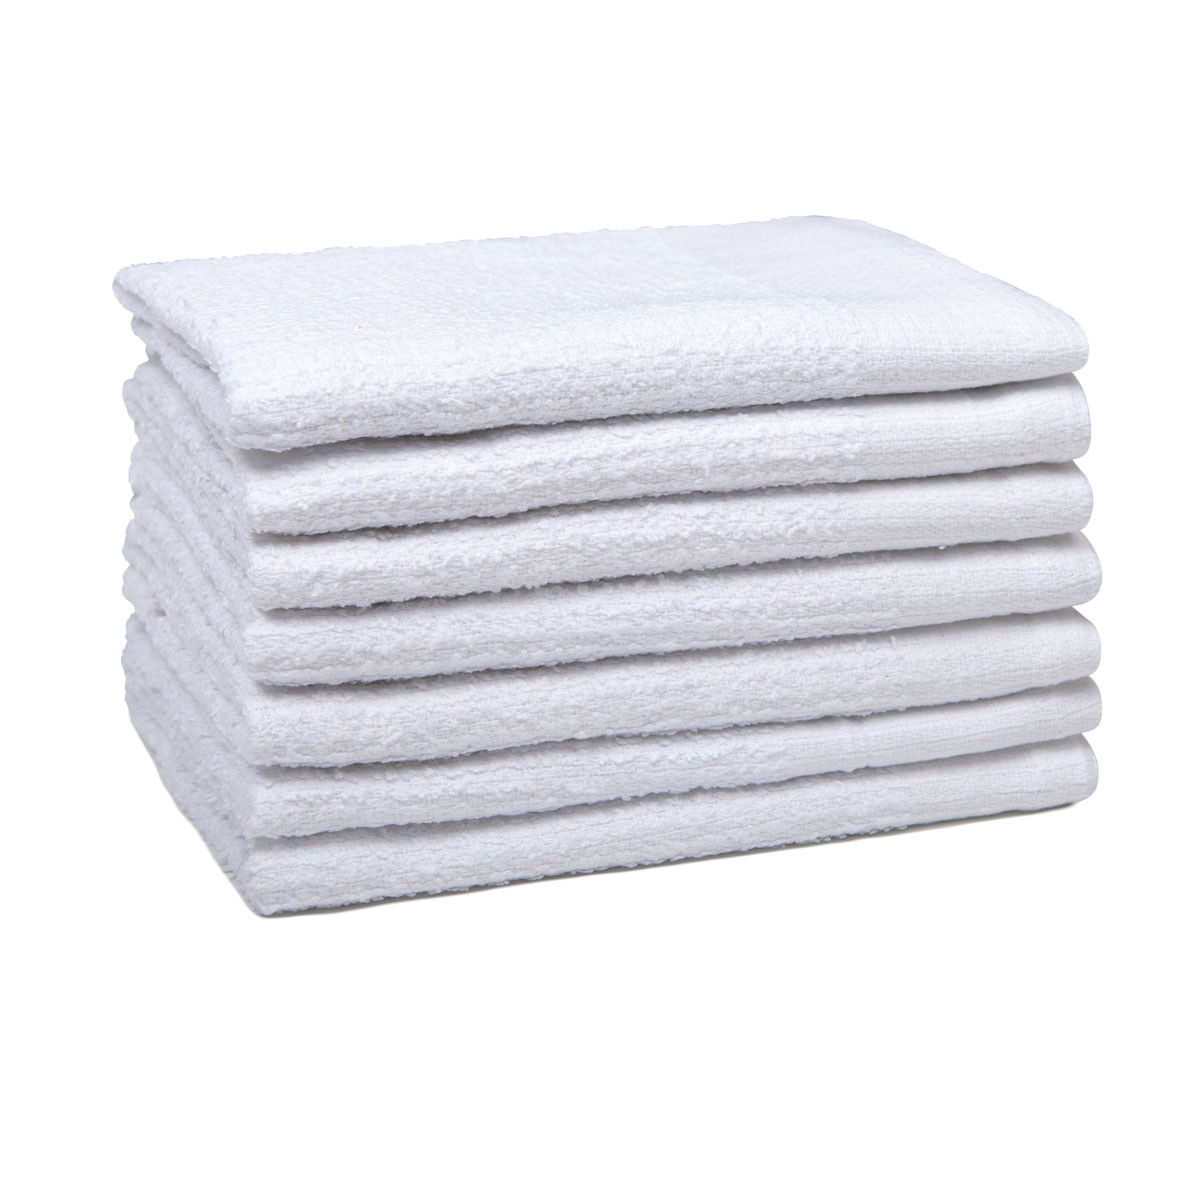 How are bar towels packed in Wholesale Bar Mop Towels by Intralin?